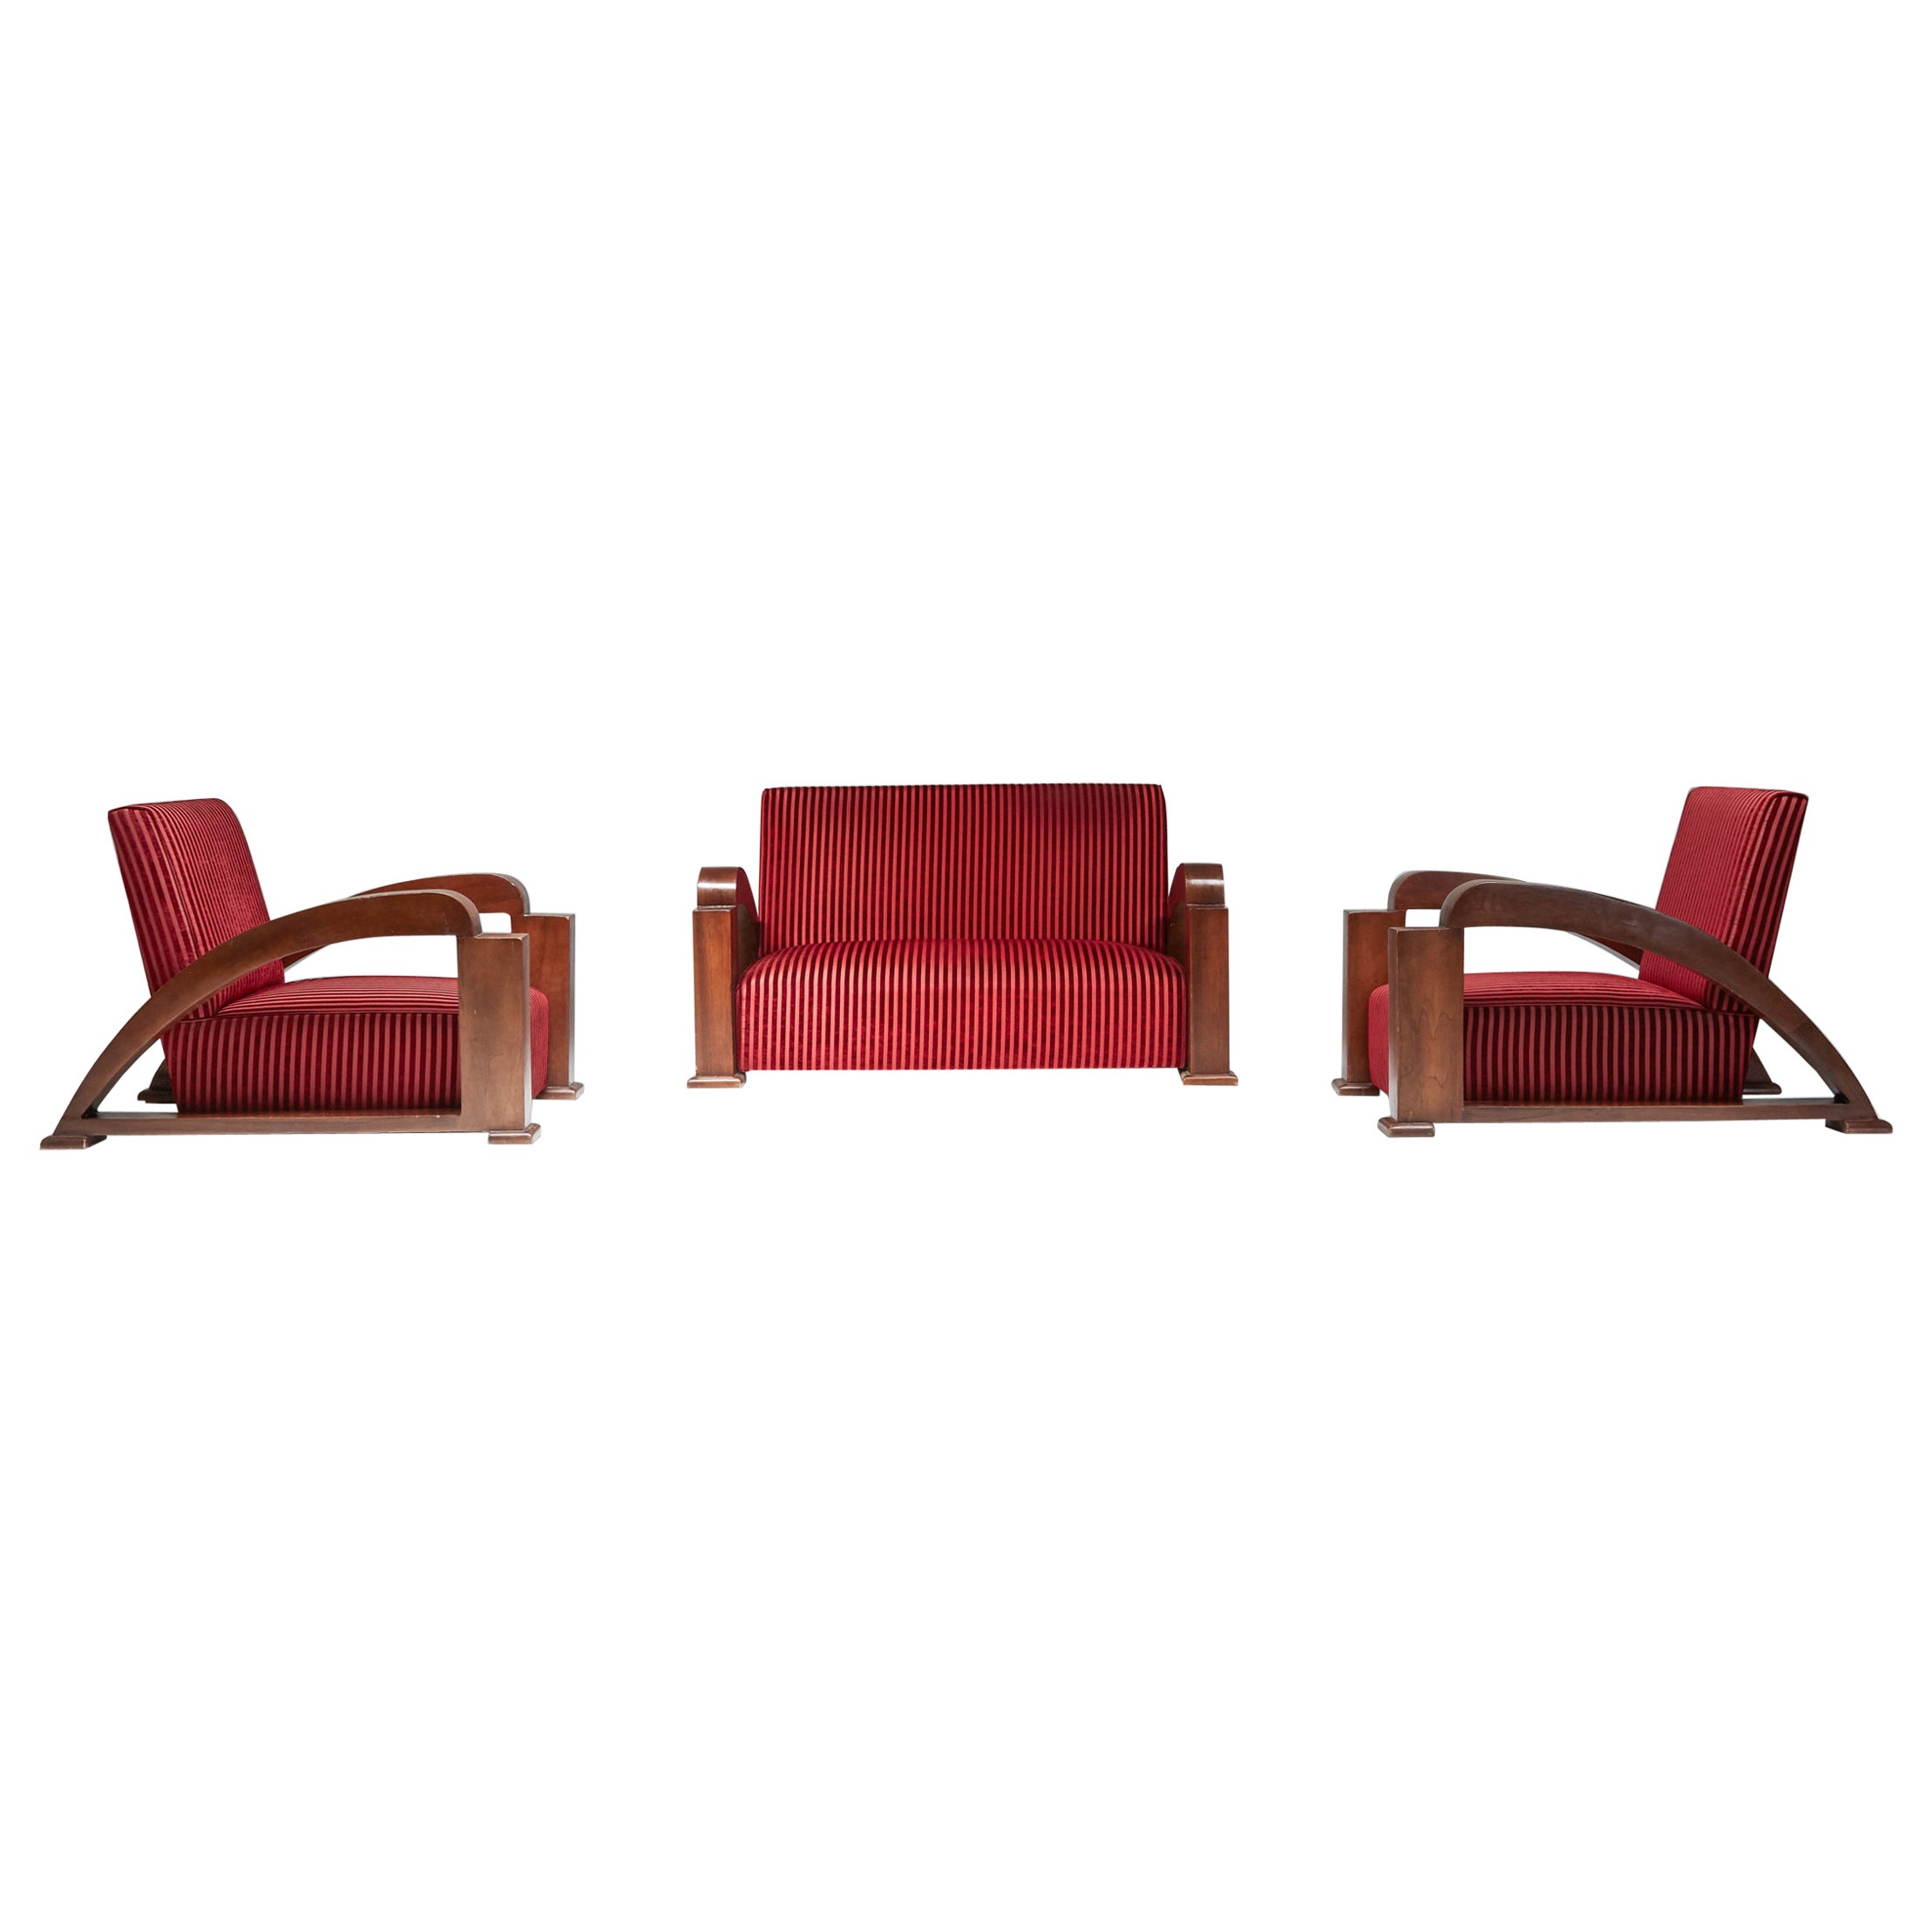 French Art Deco Living Room Set in Red Striped Velvet and with Swoosh Armrests